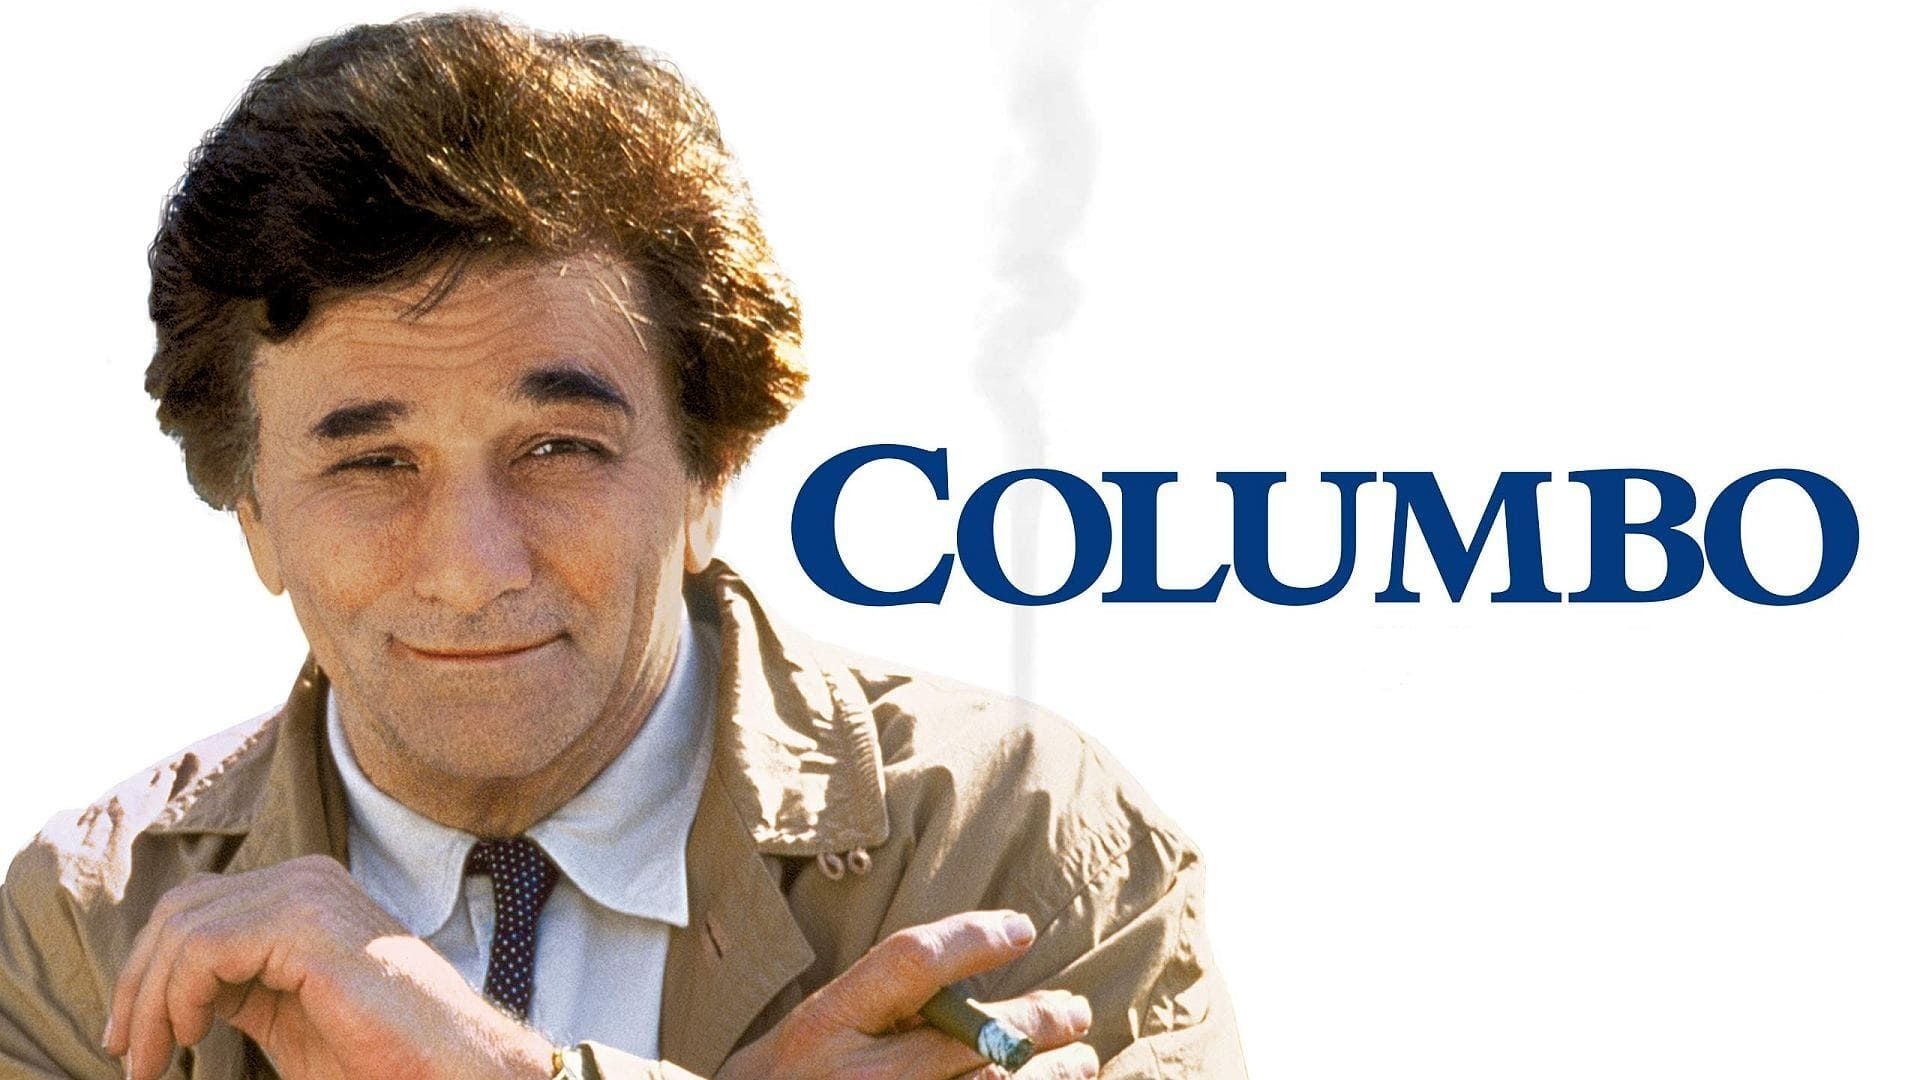 Columbo (Movie): Falk, The shabby raincoat and a cigar, The winner, Four Emmys and a Golden Globe. 1920x1080 Full HD Background.